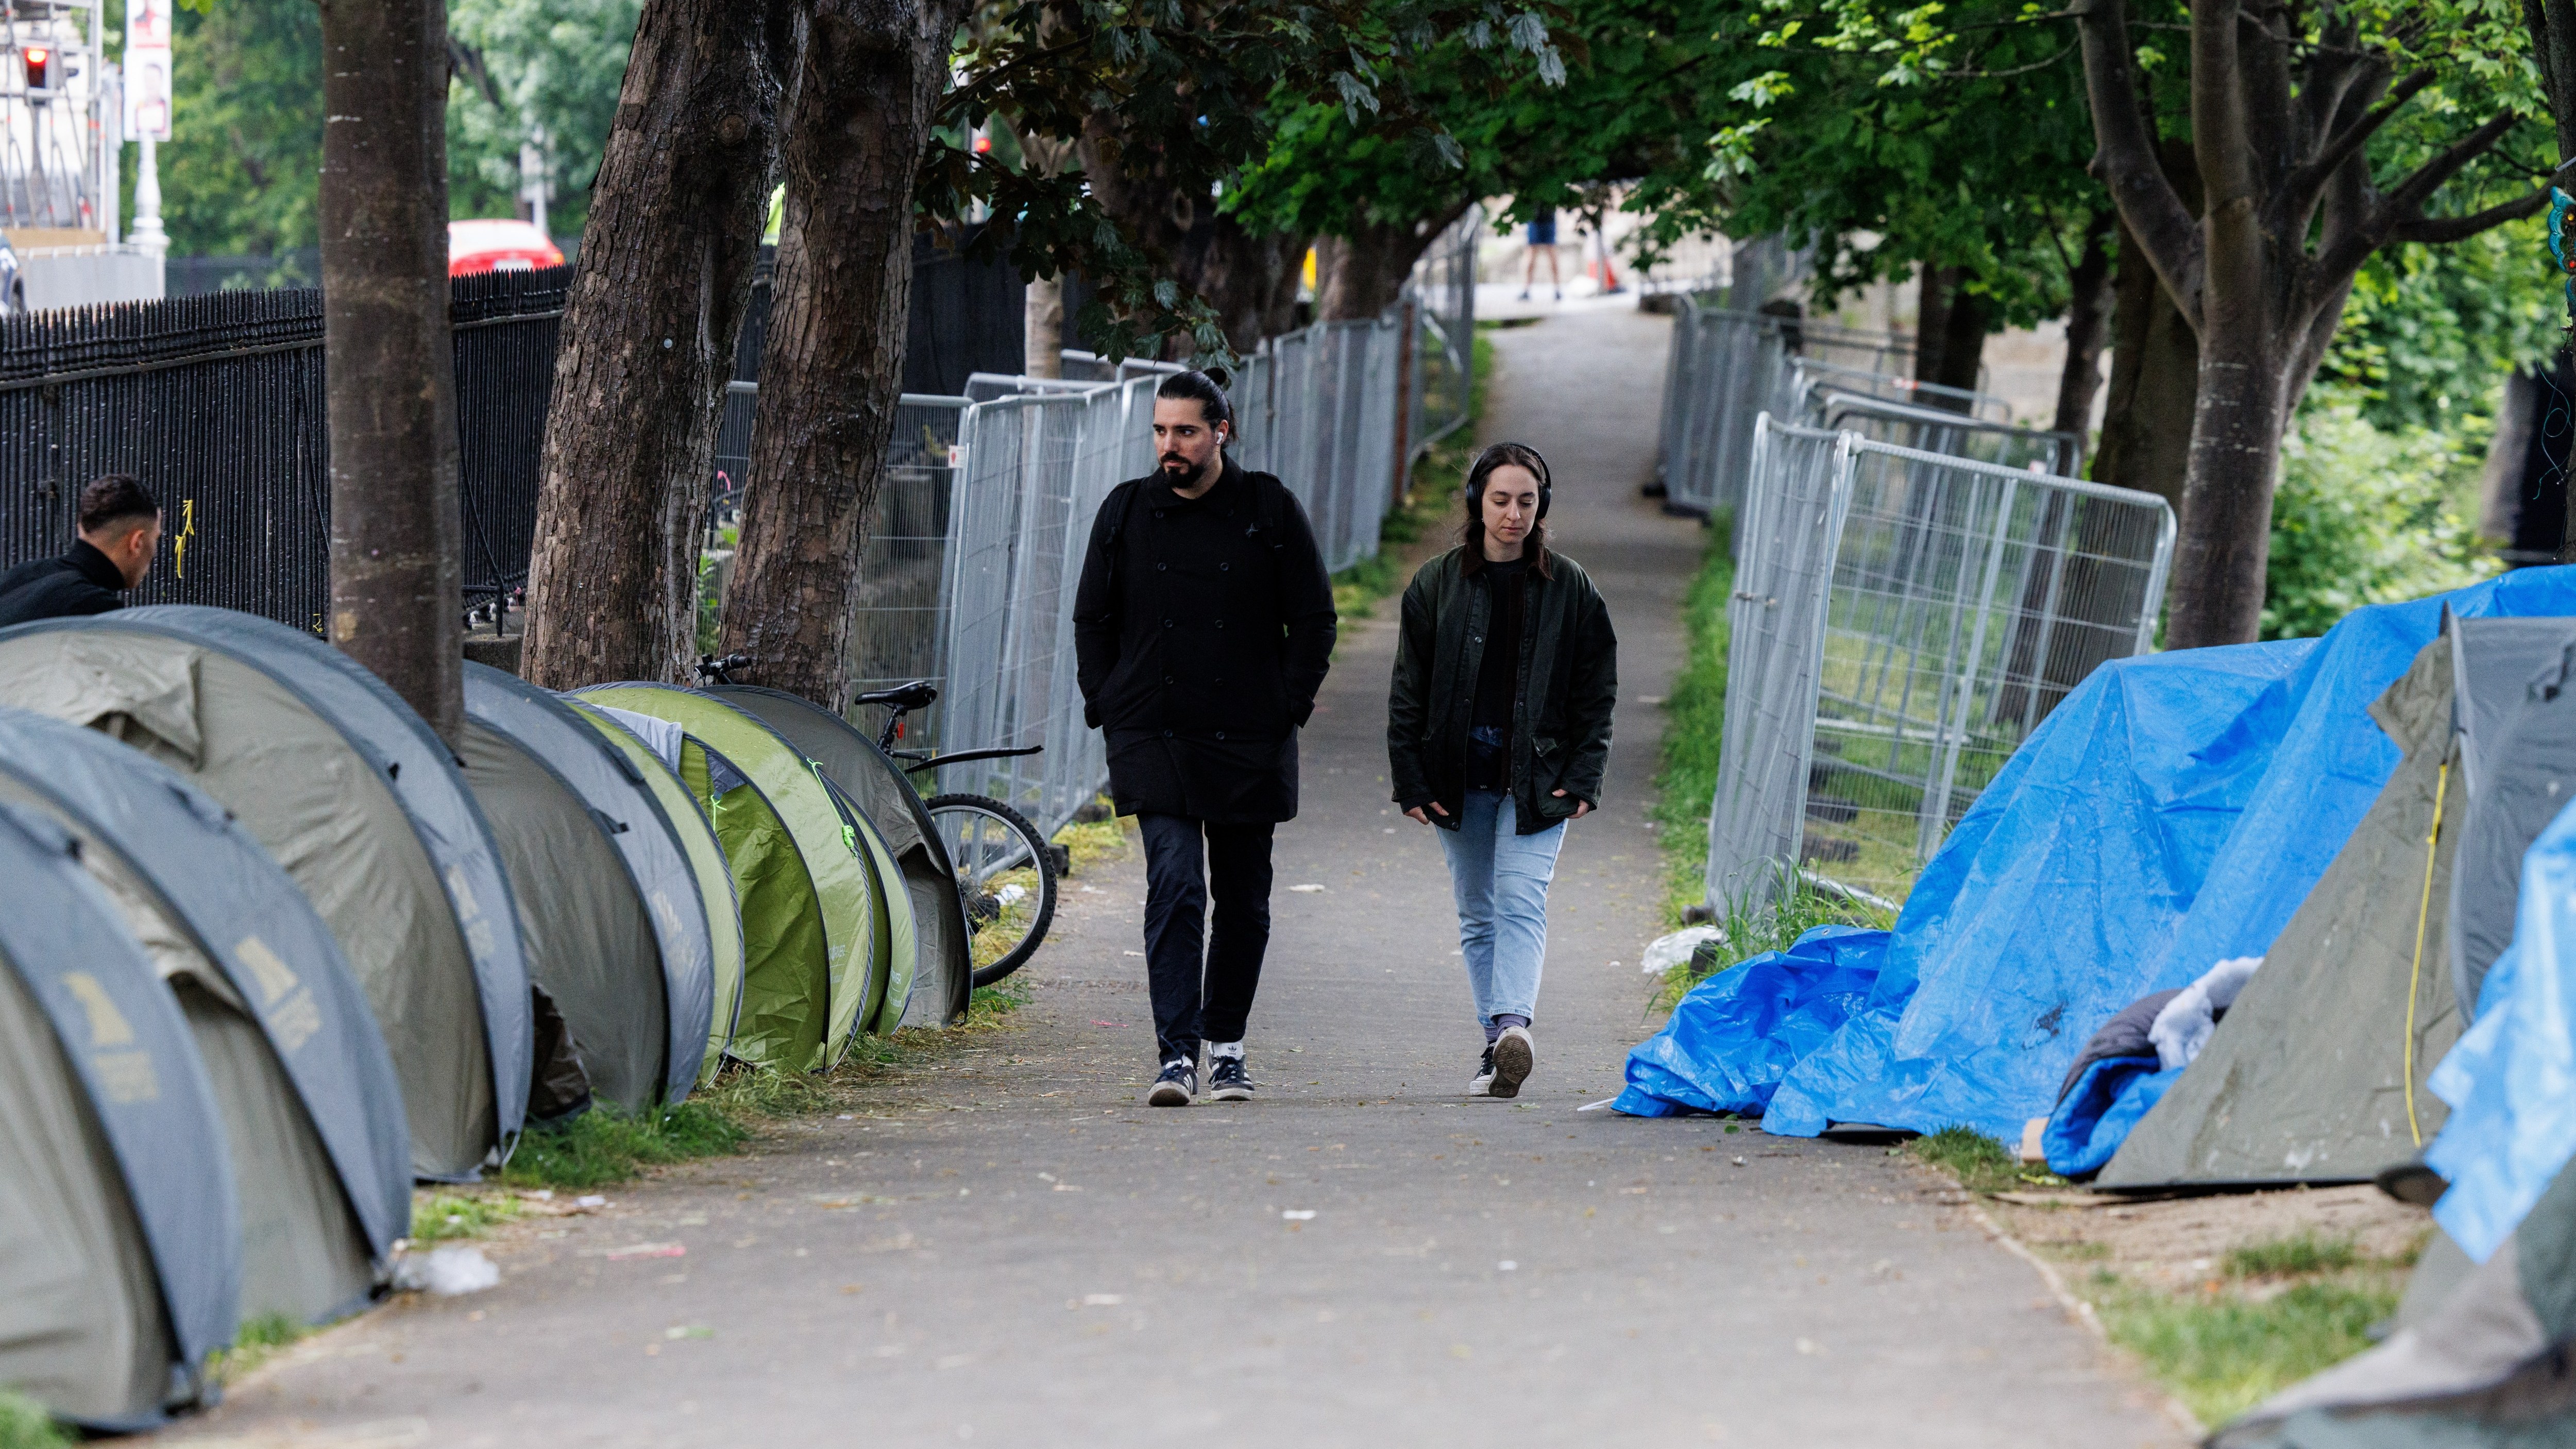 Asylum seekers sleep in tents in a makeshift camp along the Grand Canal in Dublin